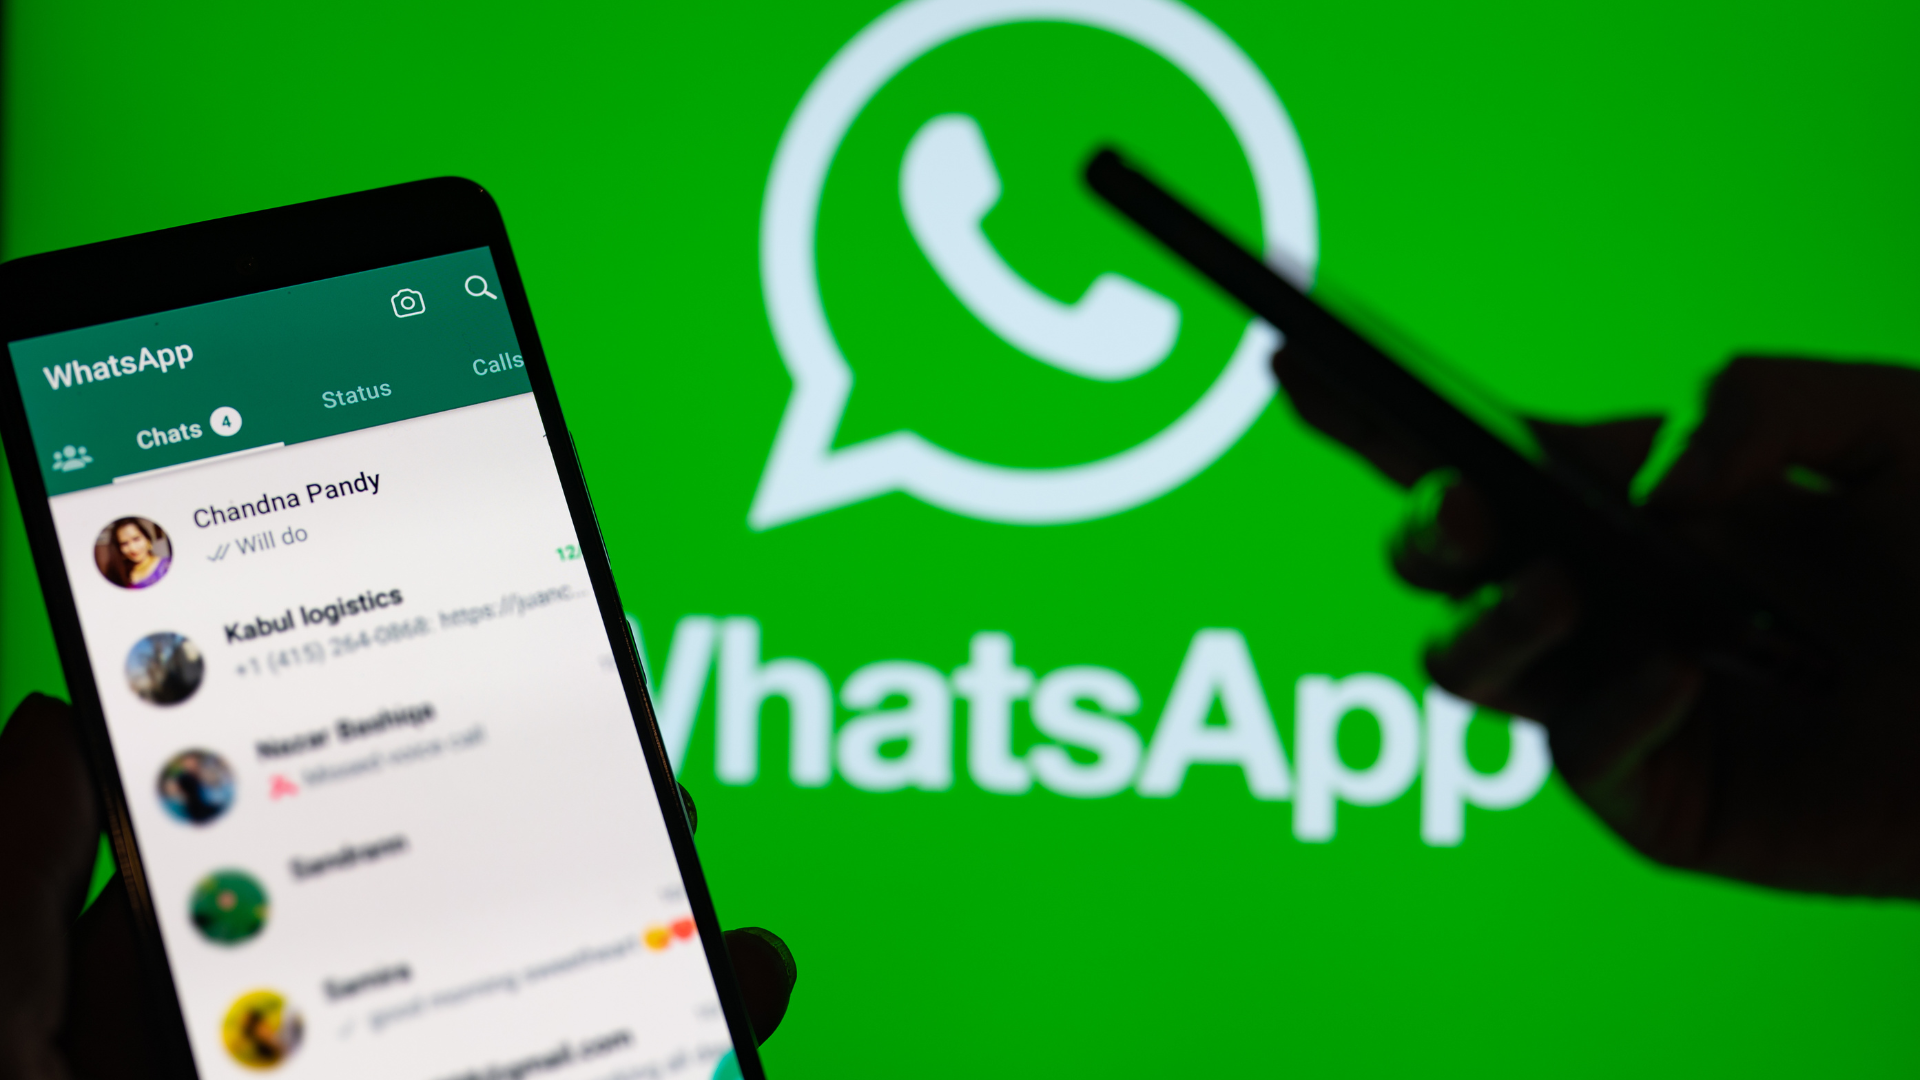 How to archive and unarchive WhatsApp chats